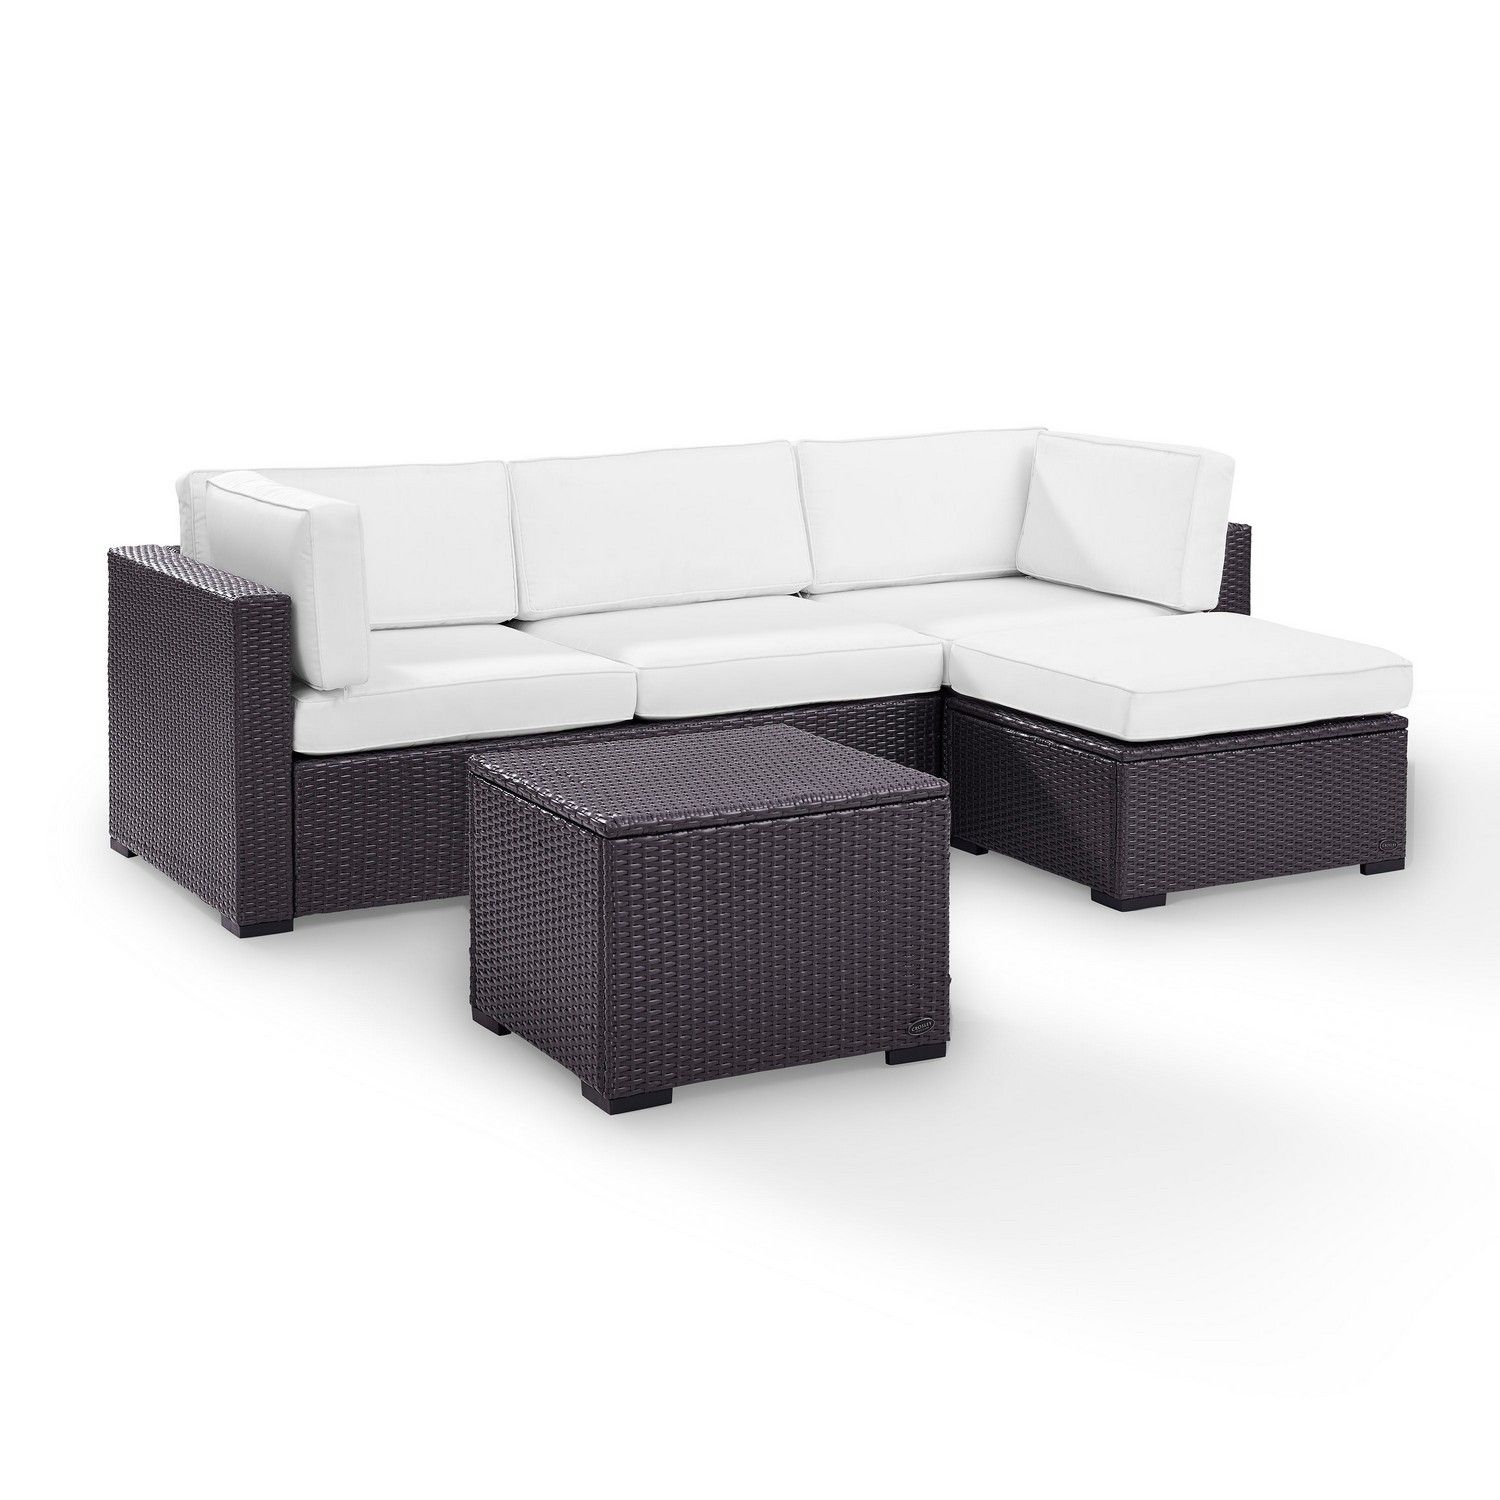 Crosley Biscayne 4-PC Outdoor Wicker Sectional Set - Loveseat, Corner Chair, Ottoman, Coffee Table - White/Brown